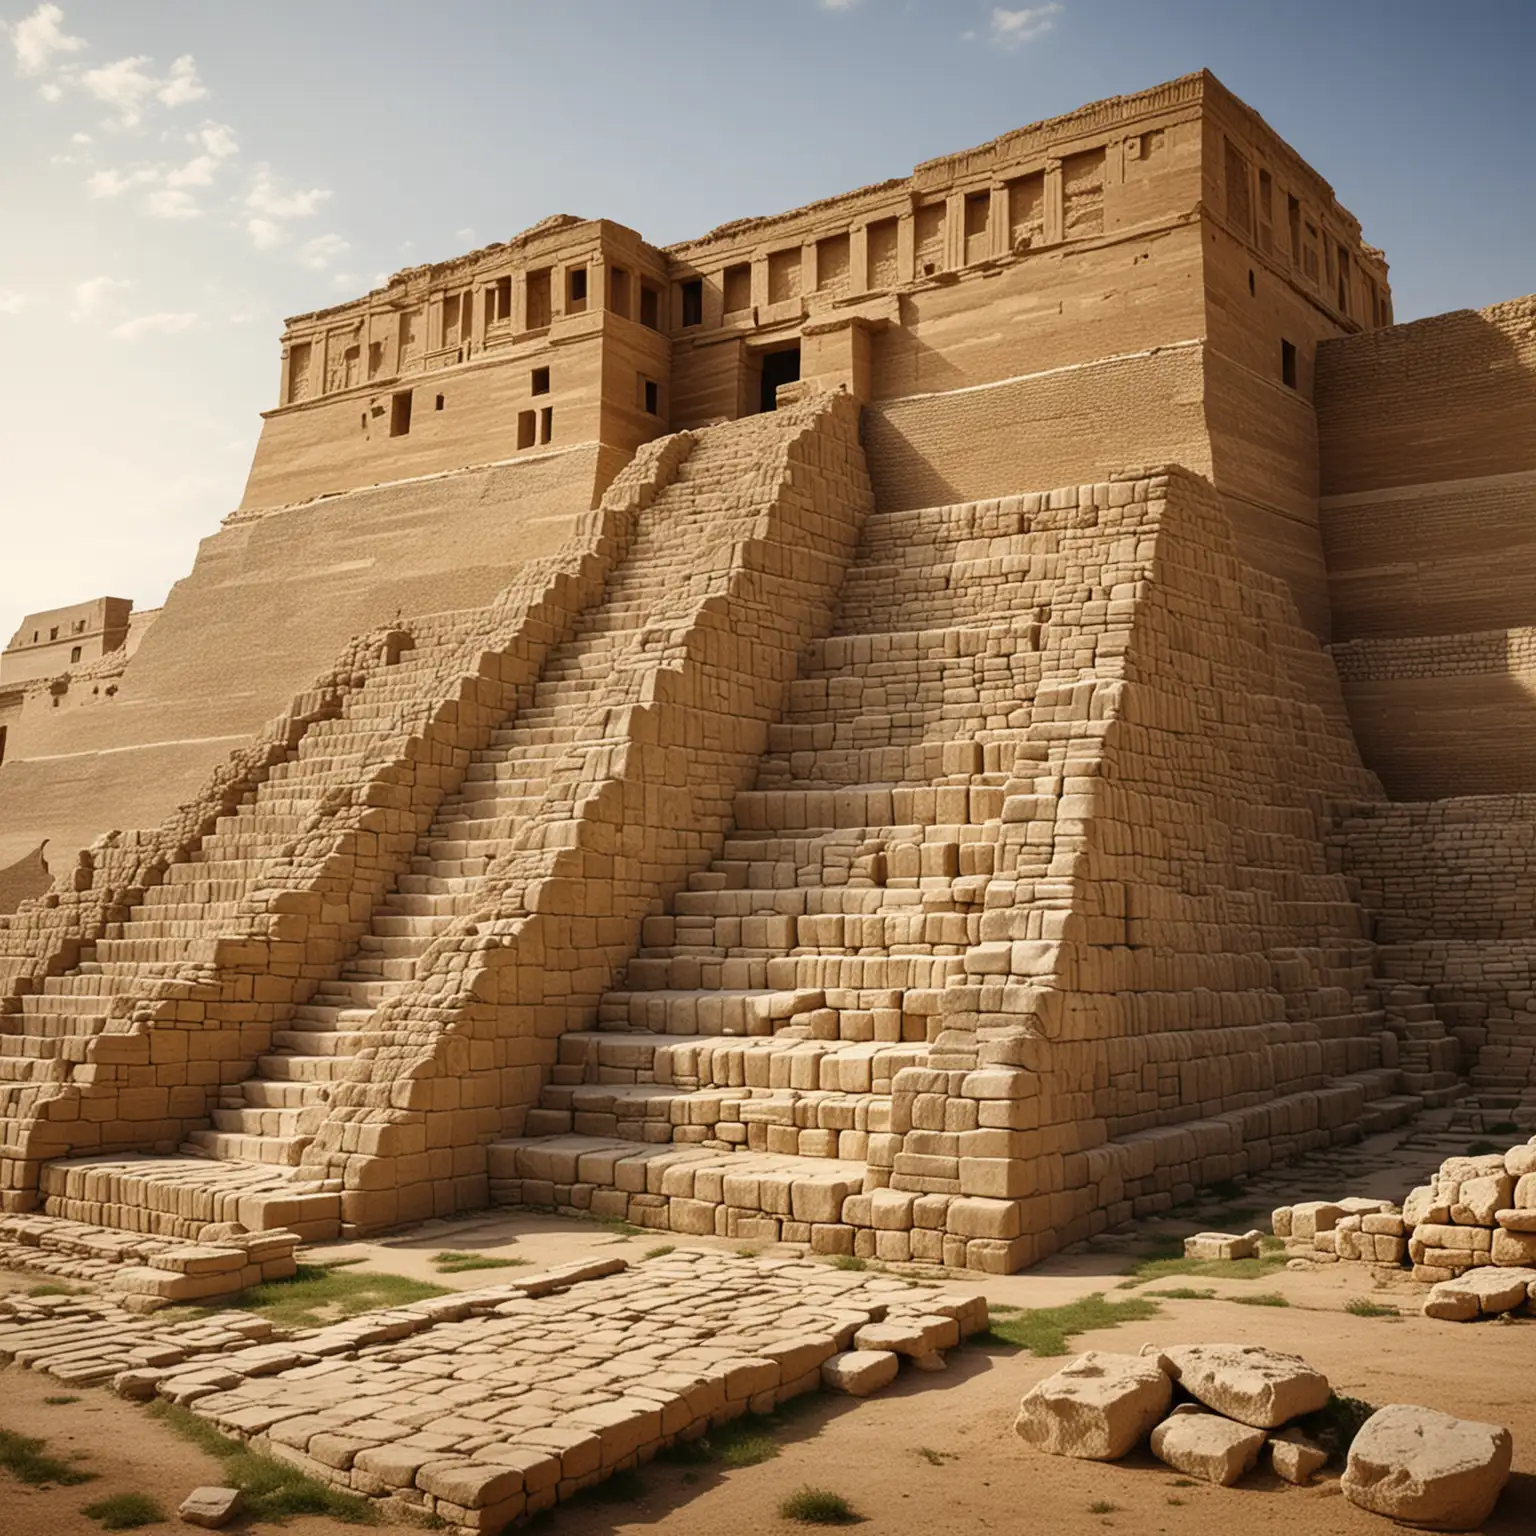 Babylonian and Roman influences contributed to the adoption of these architectural features in monumental buildings and palaces. Create a ziggurat from 500 bce to 1 ce showcasing such an influence.
